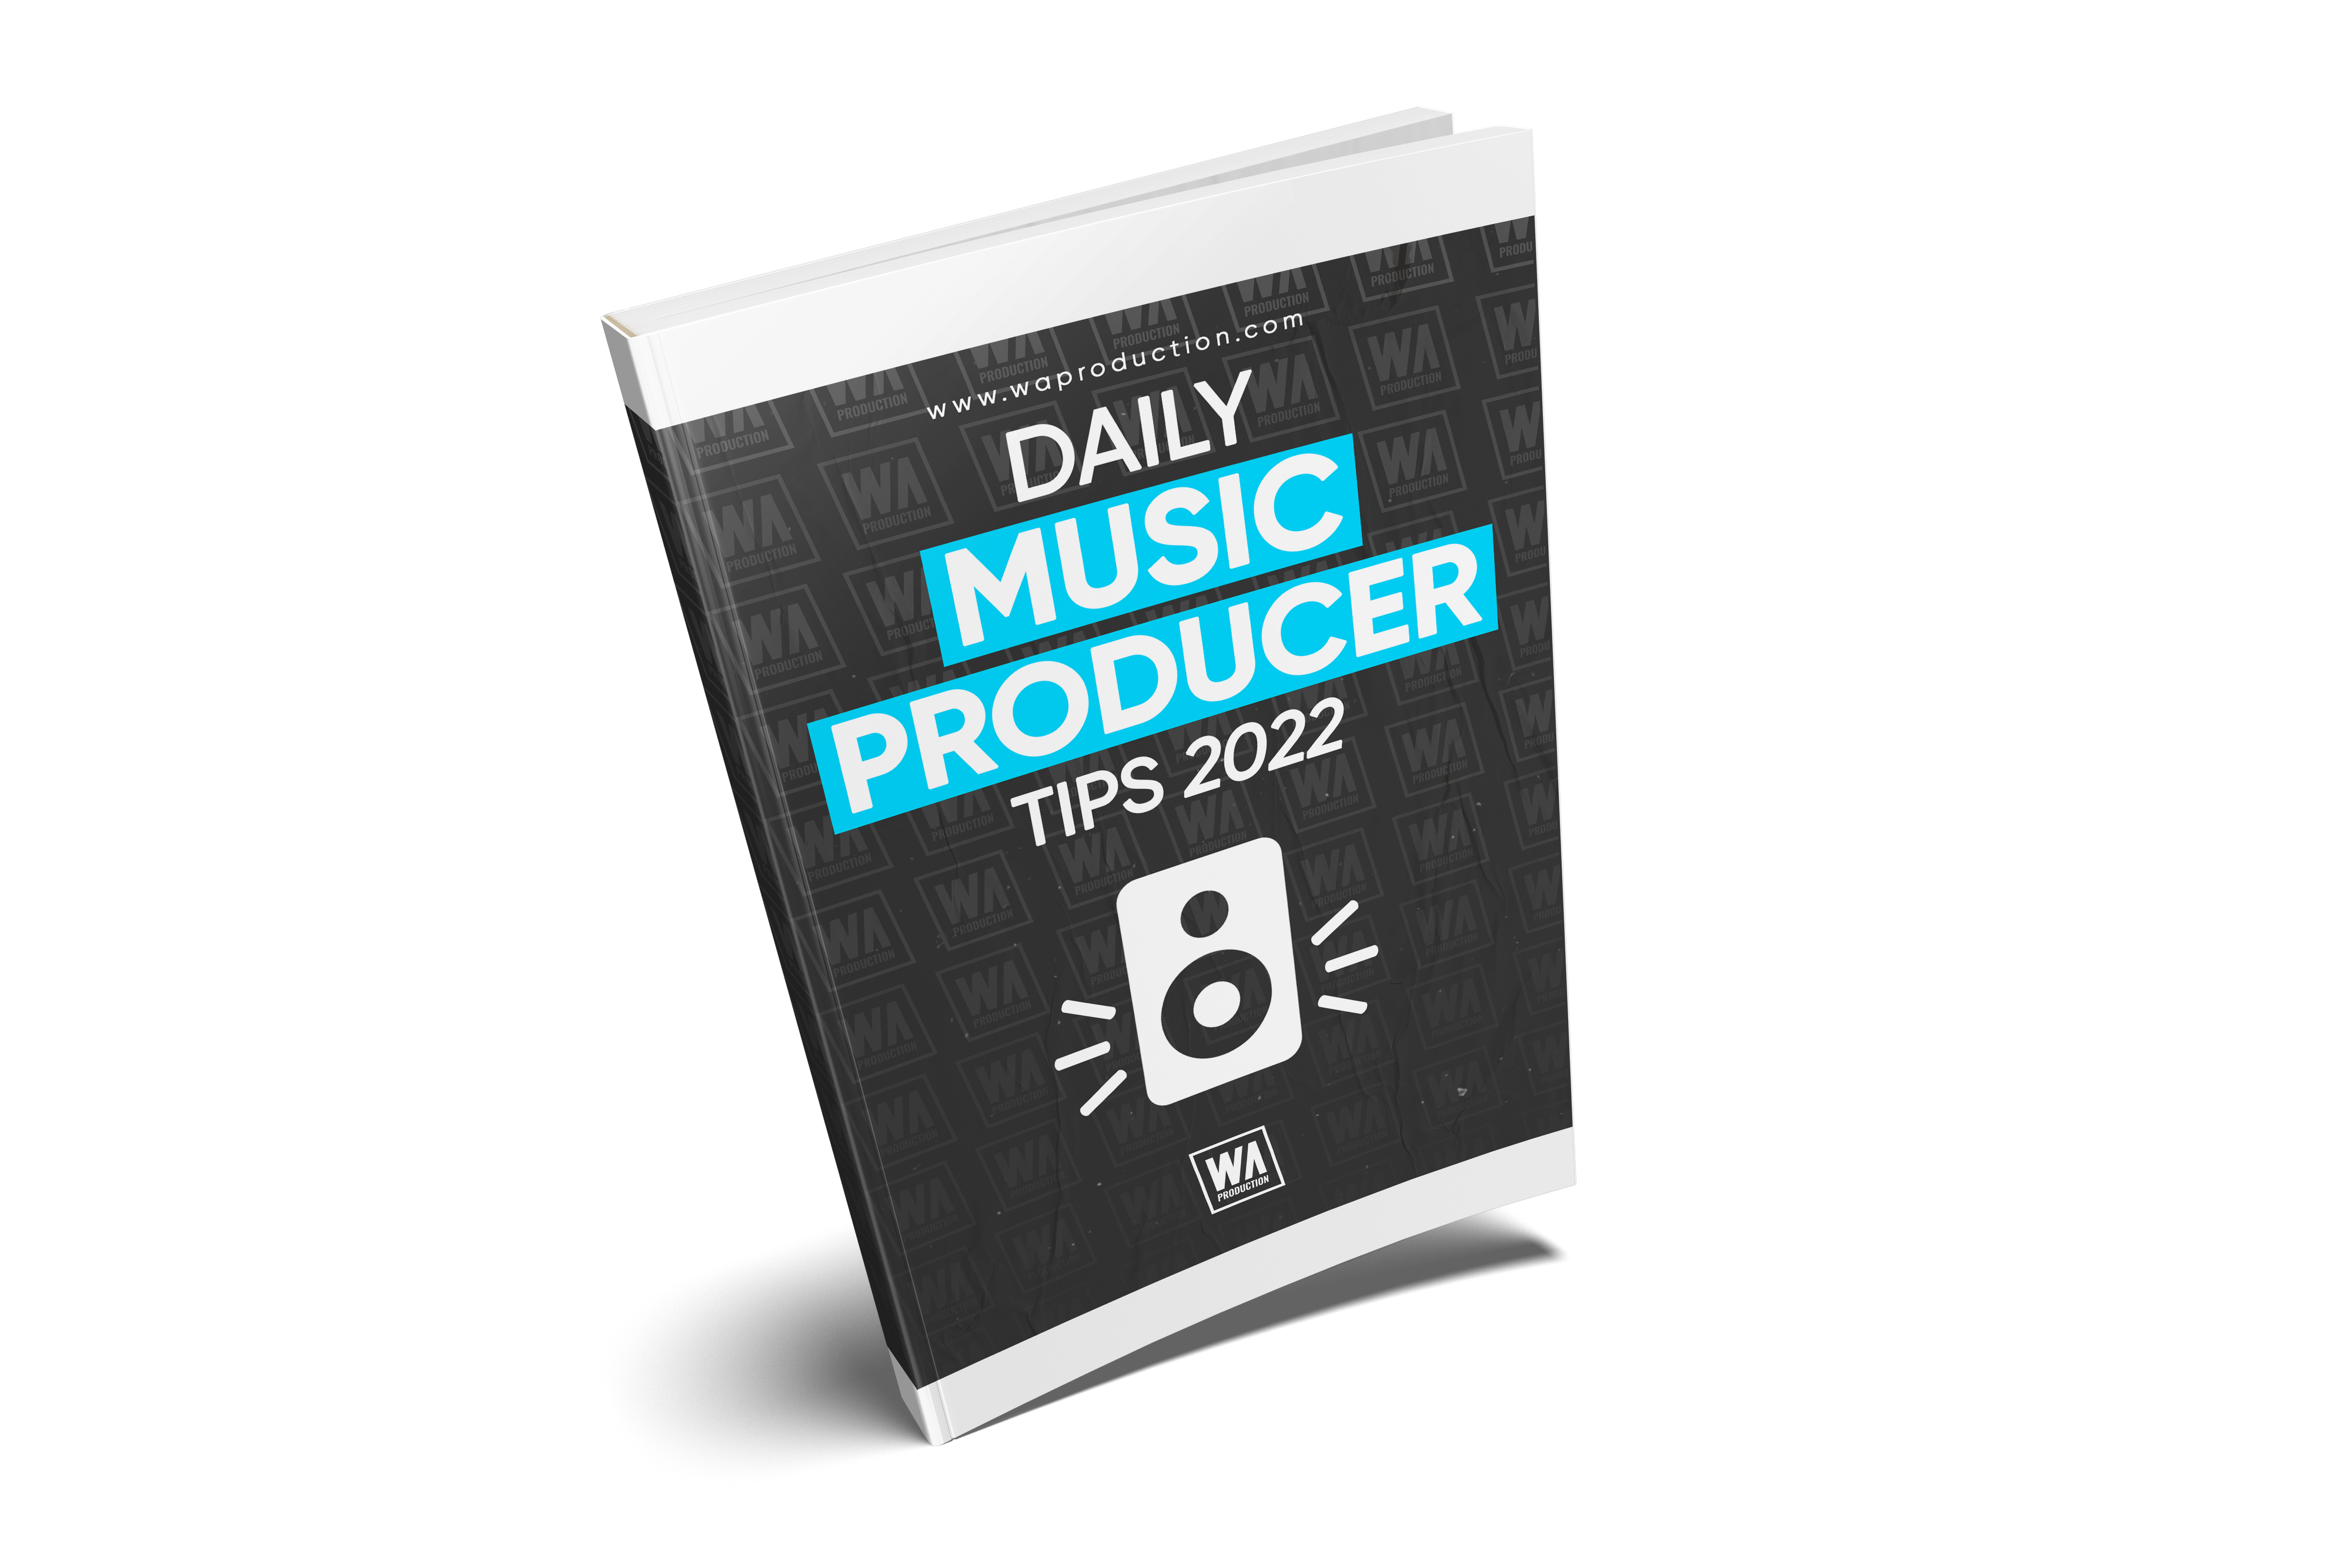 Daily Music Producer Tips 2022